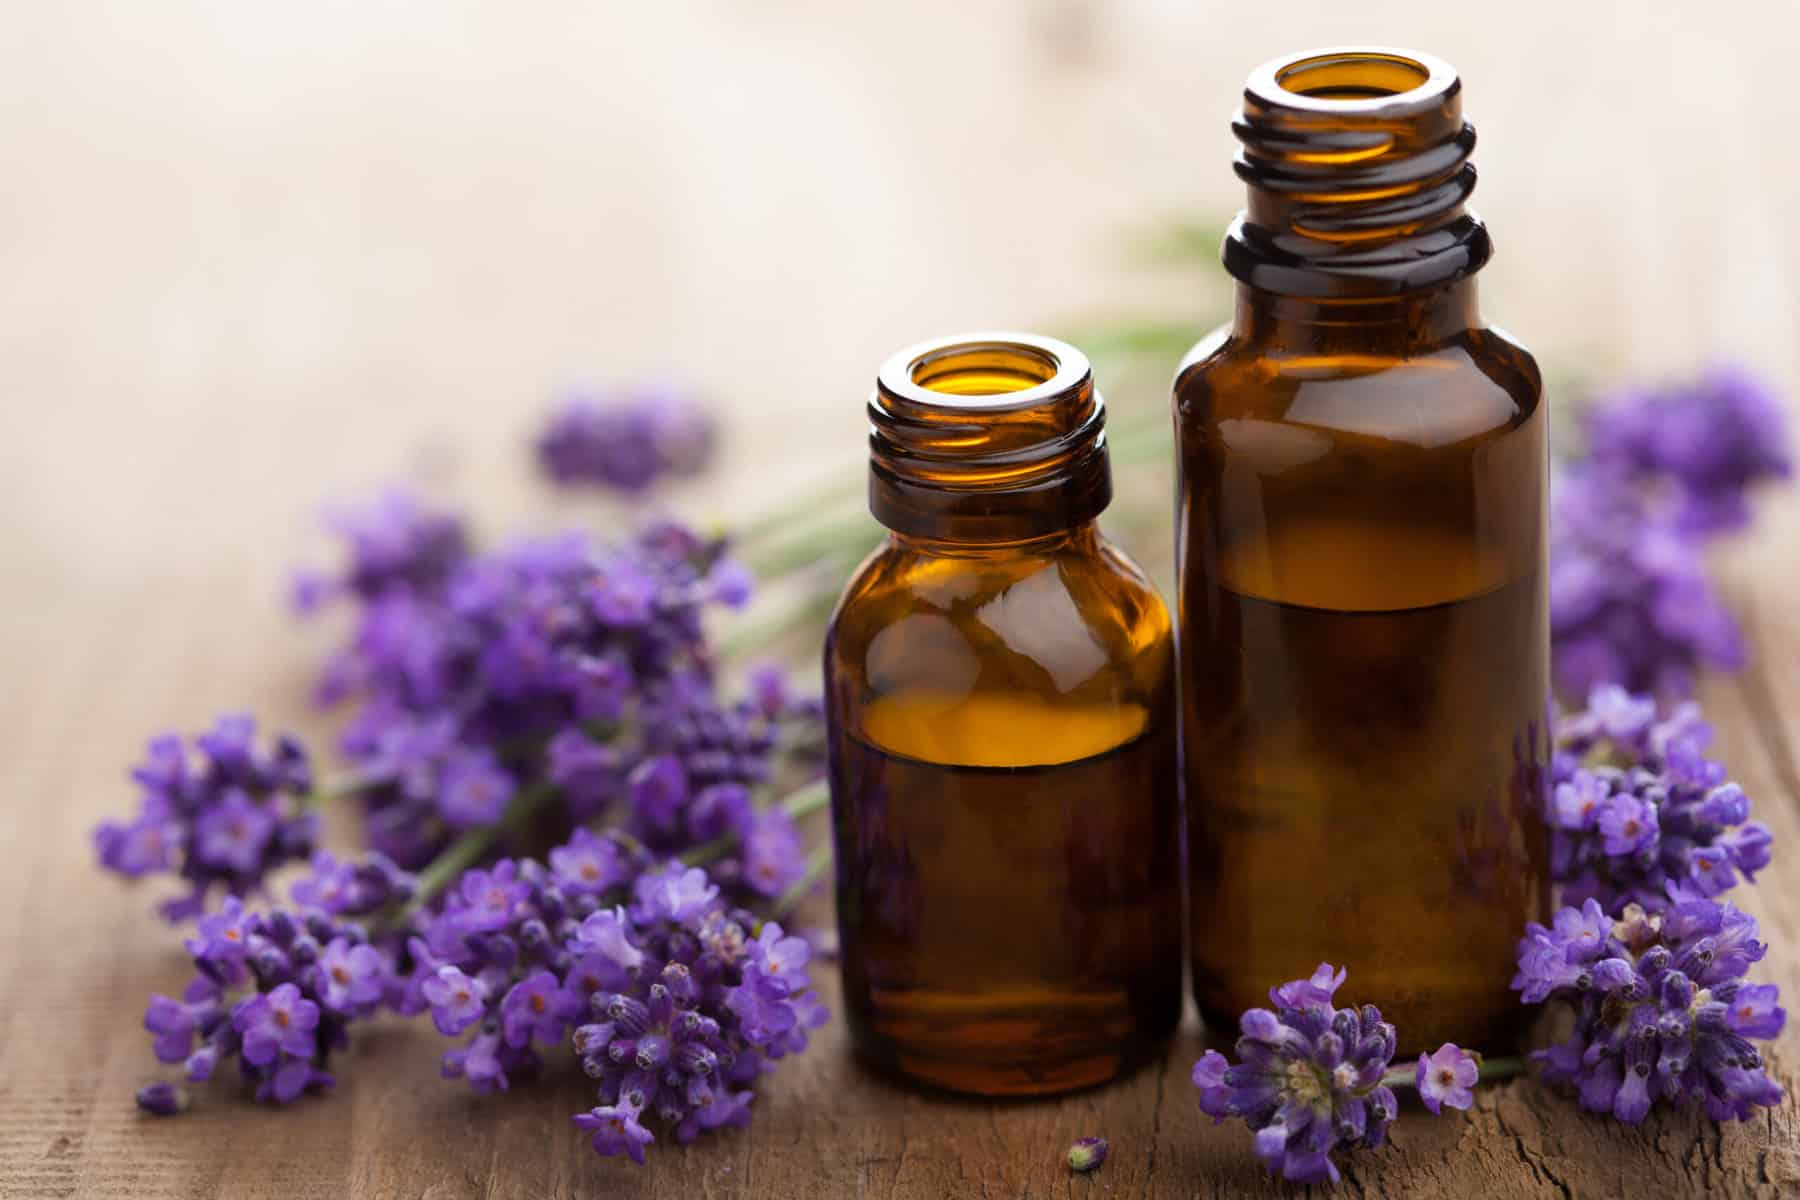 A close up of two bottles of essential oils with purple lavender flowers next to them on a wooden table.